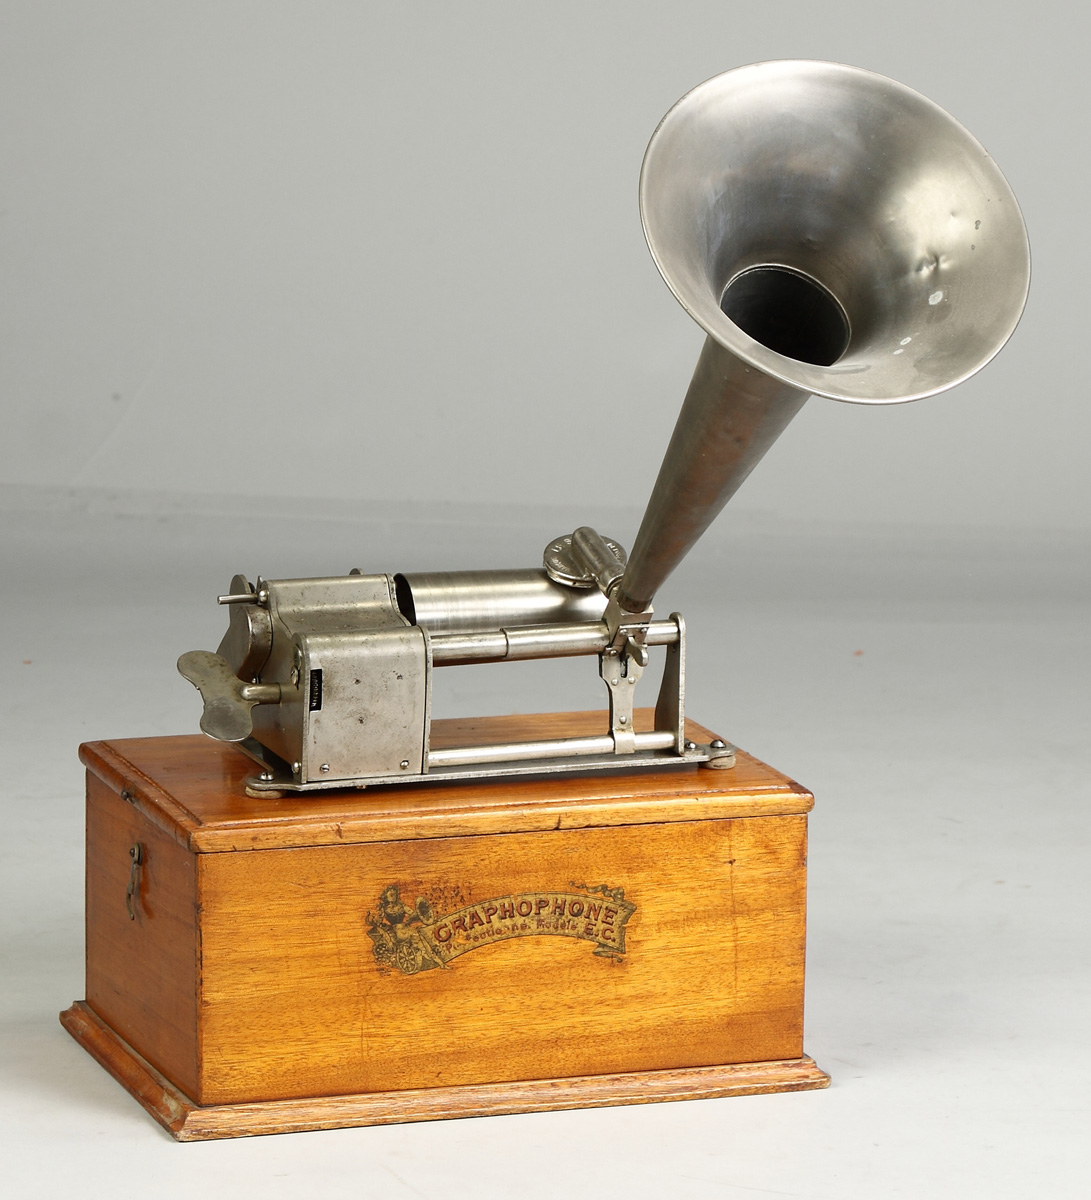 Perfectionned Graphophone Sold in